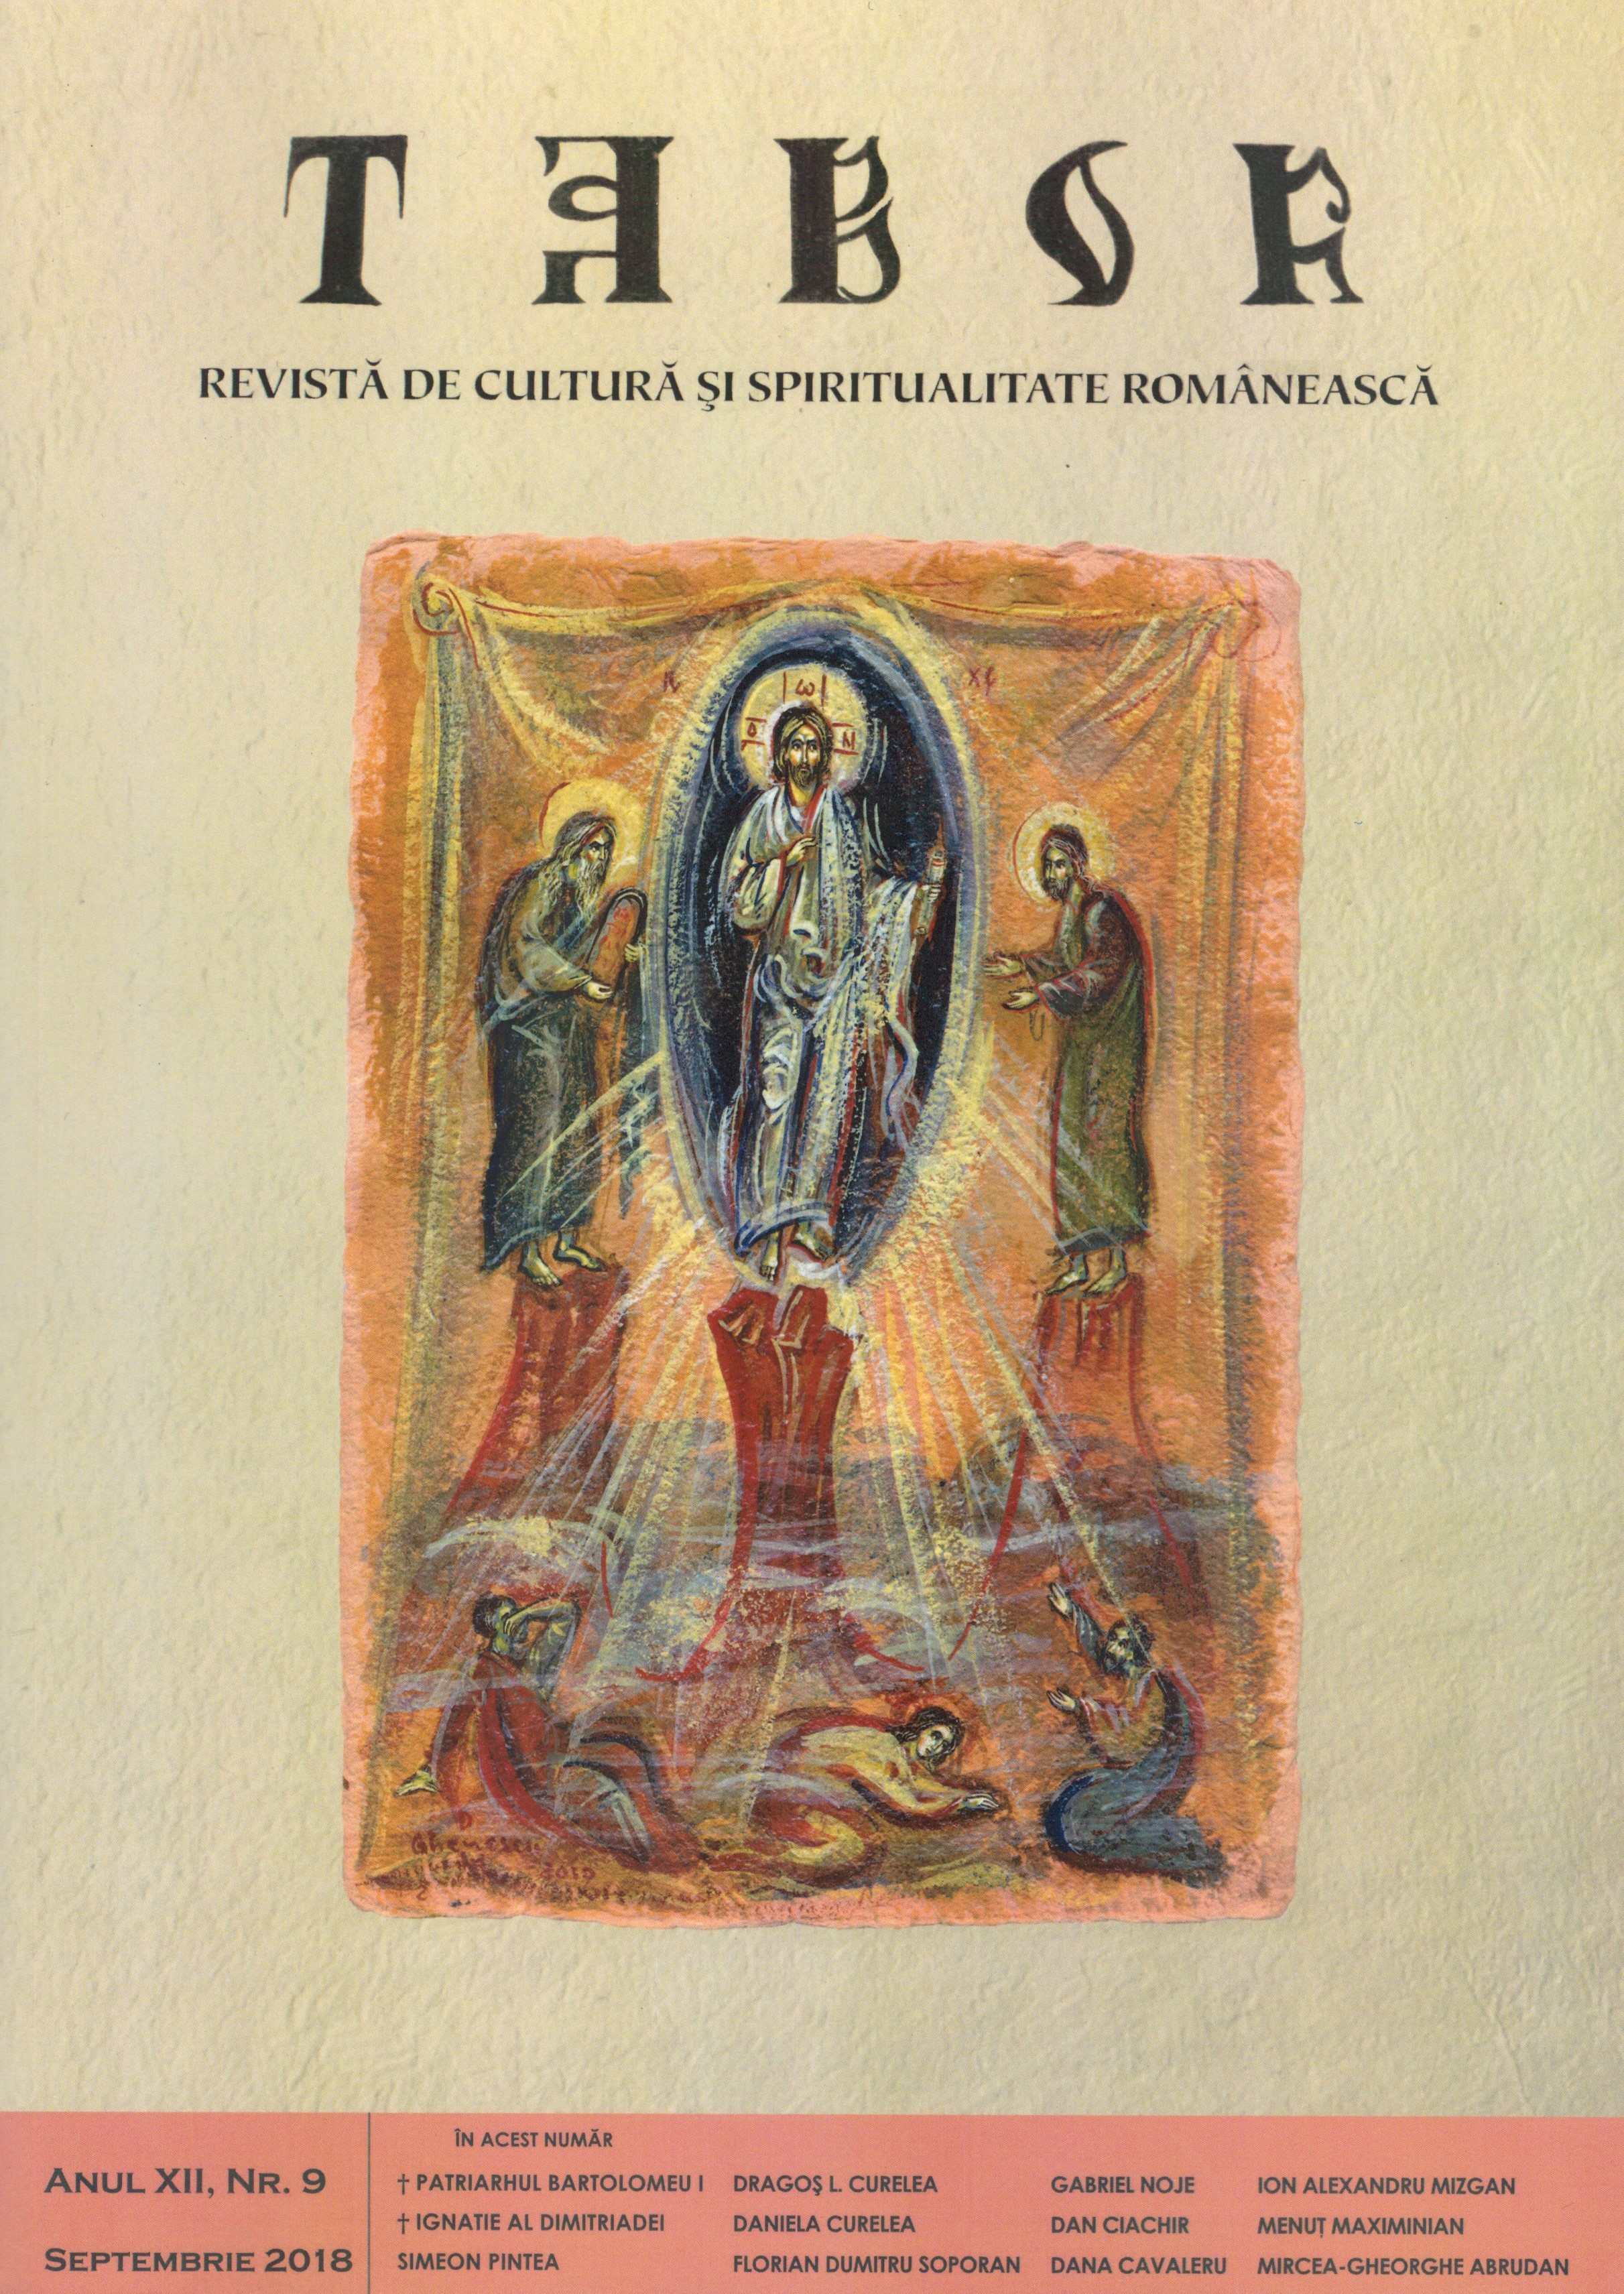 "In the historiography dedicated to religious union, the works of the historian Silviu Dragomir represent reference contributions" Cover Image